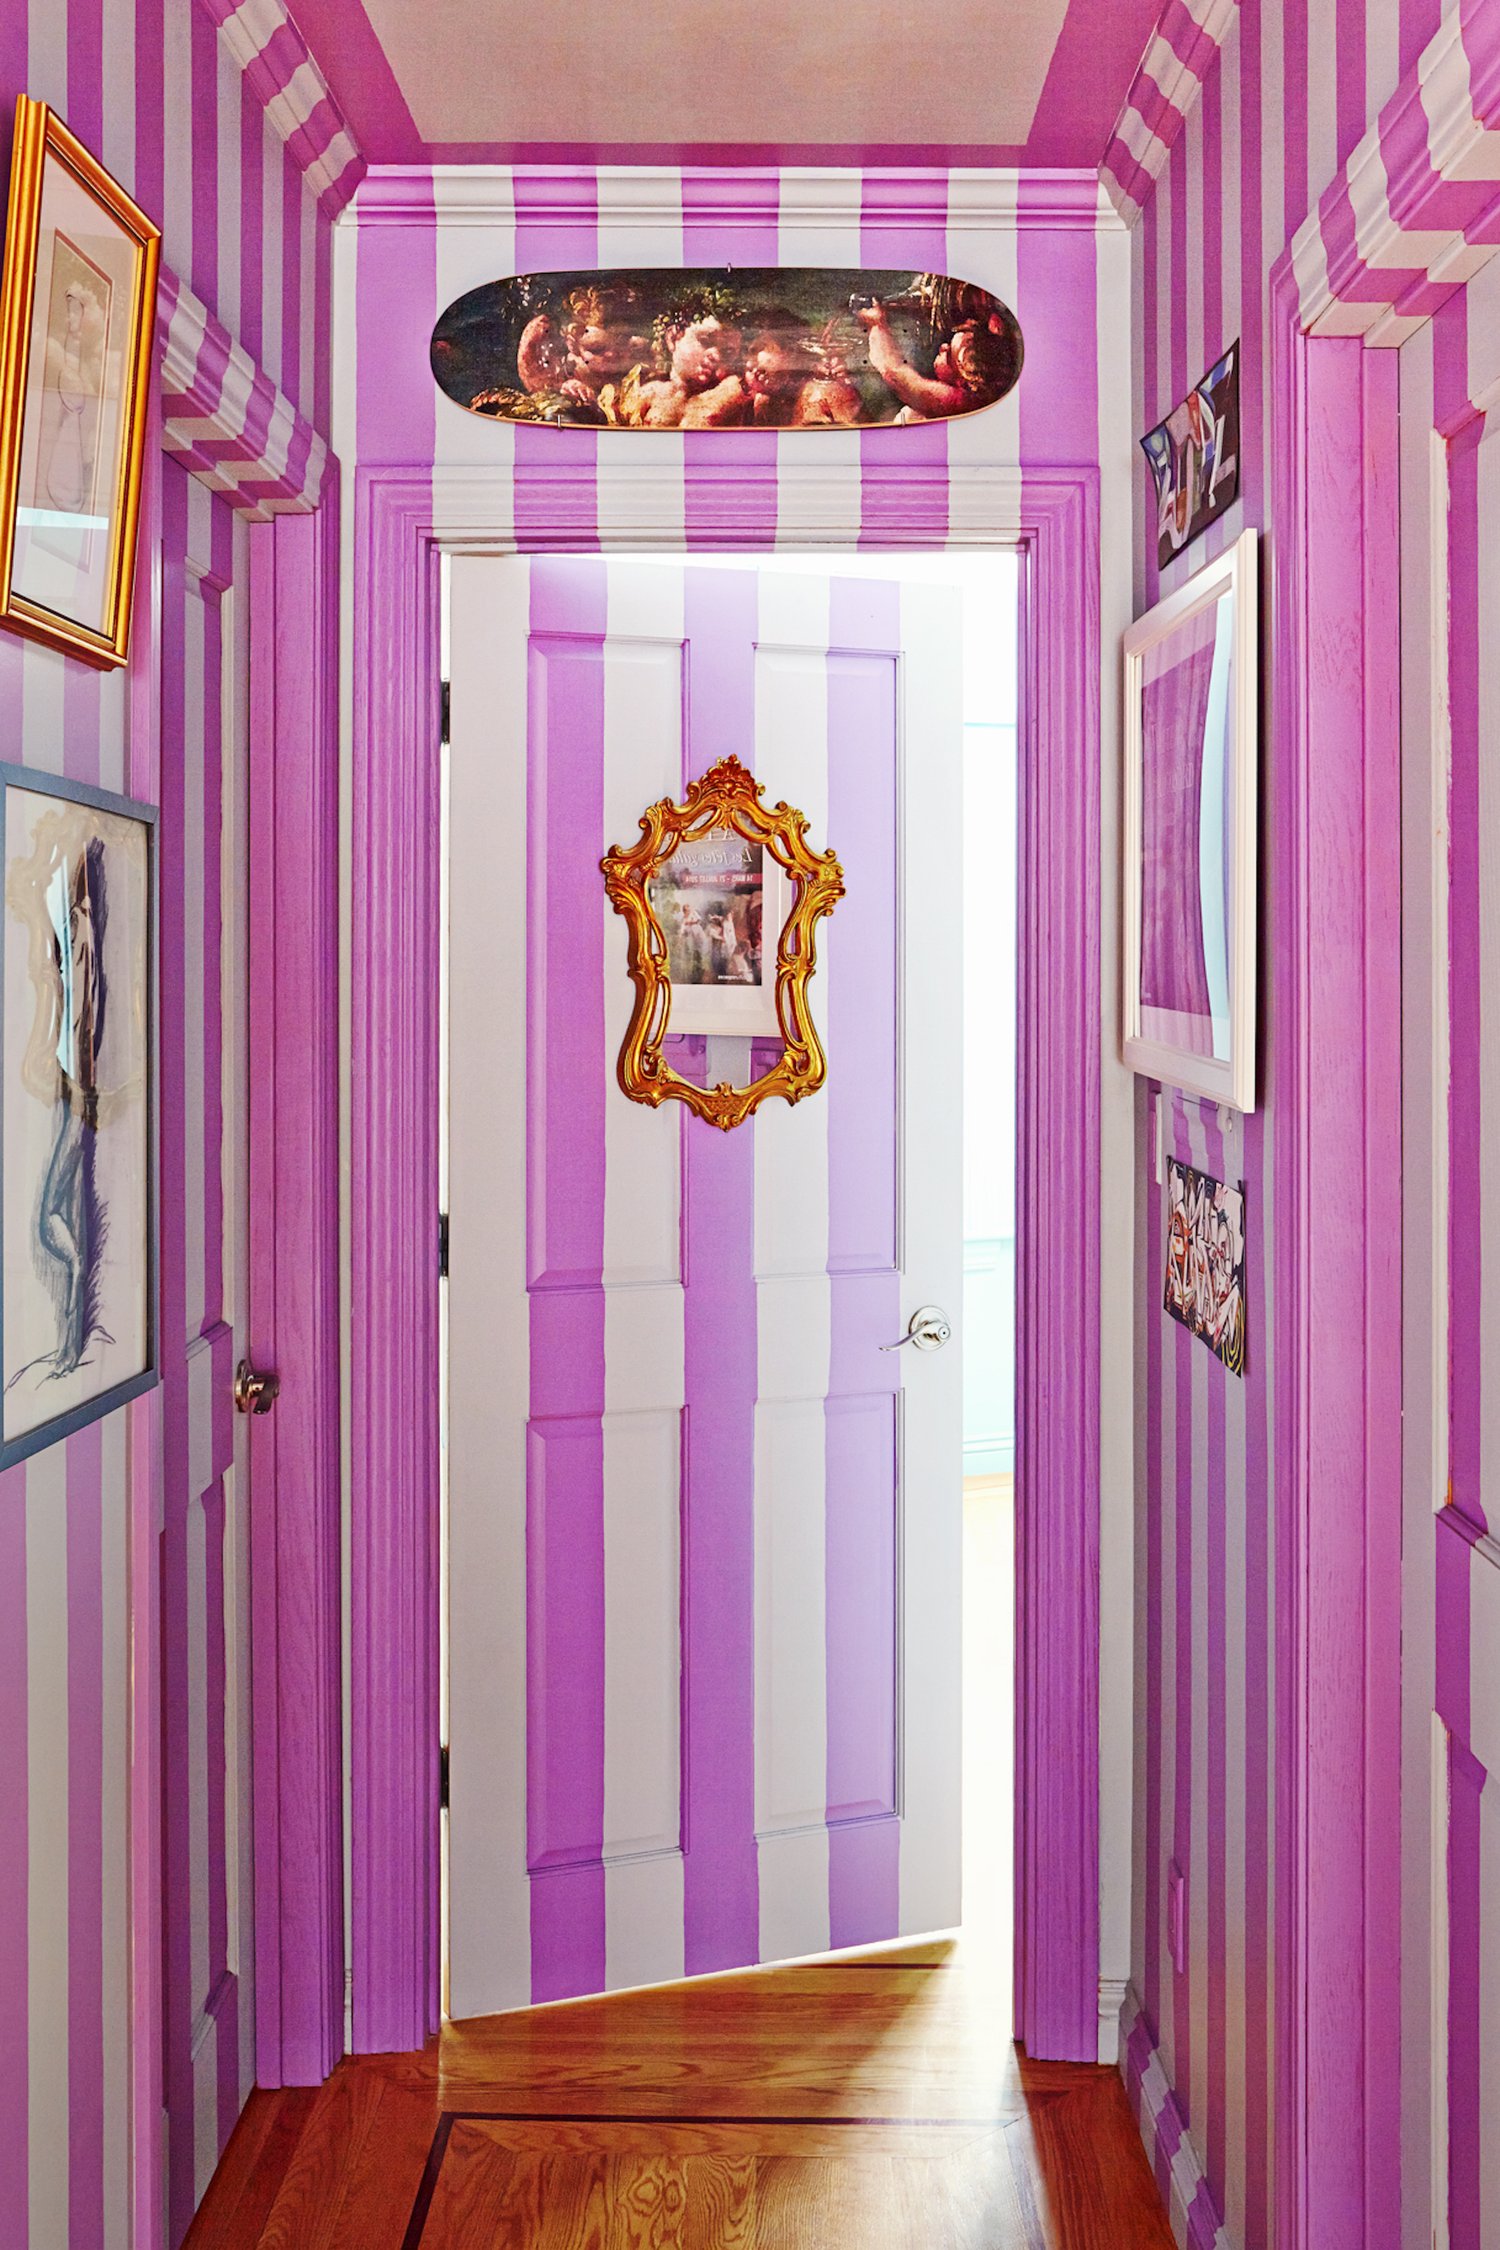 A hallway features magenta and white vertical striped walls and doors. The door has a gold ornate mirror, and framed artwork decorates the walls.